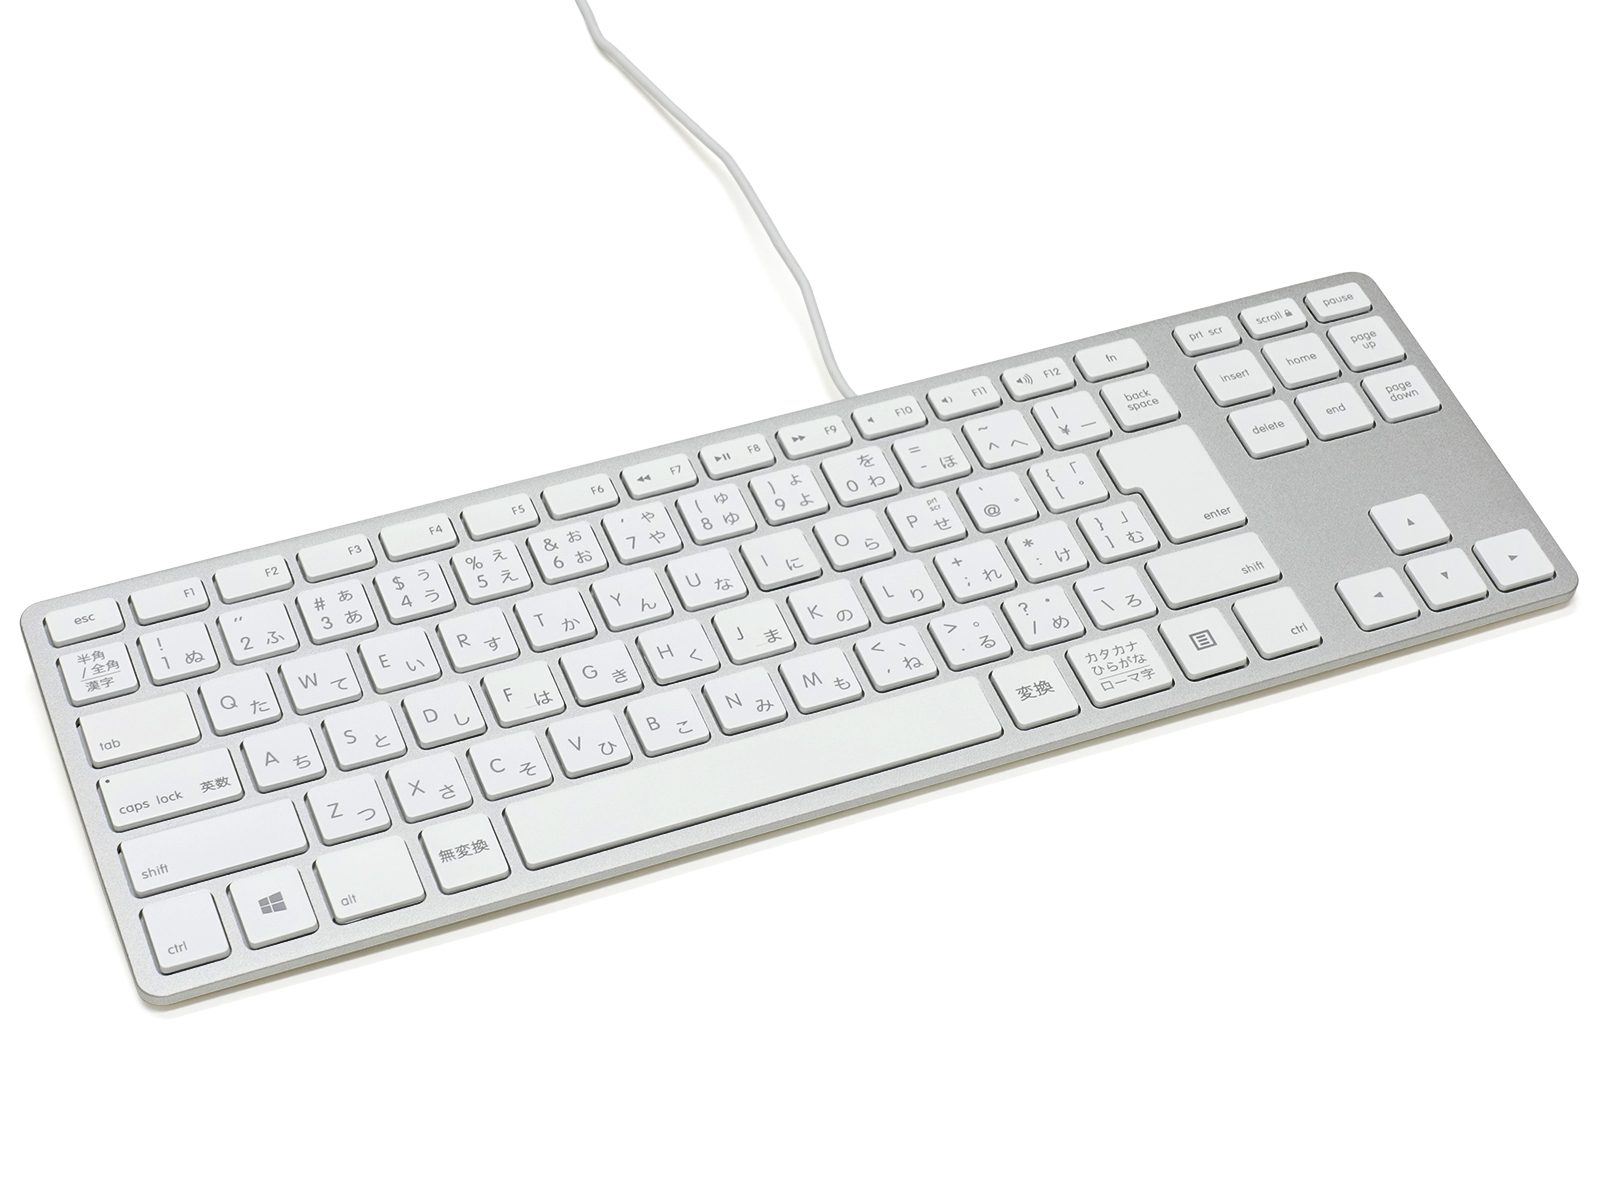 Matias Wired Aluminum Tenkeyless keyboard for PC: image 2 of 6 thumb